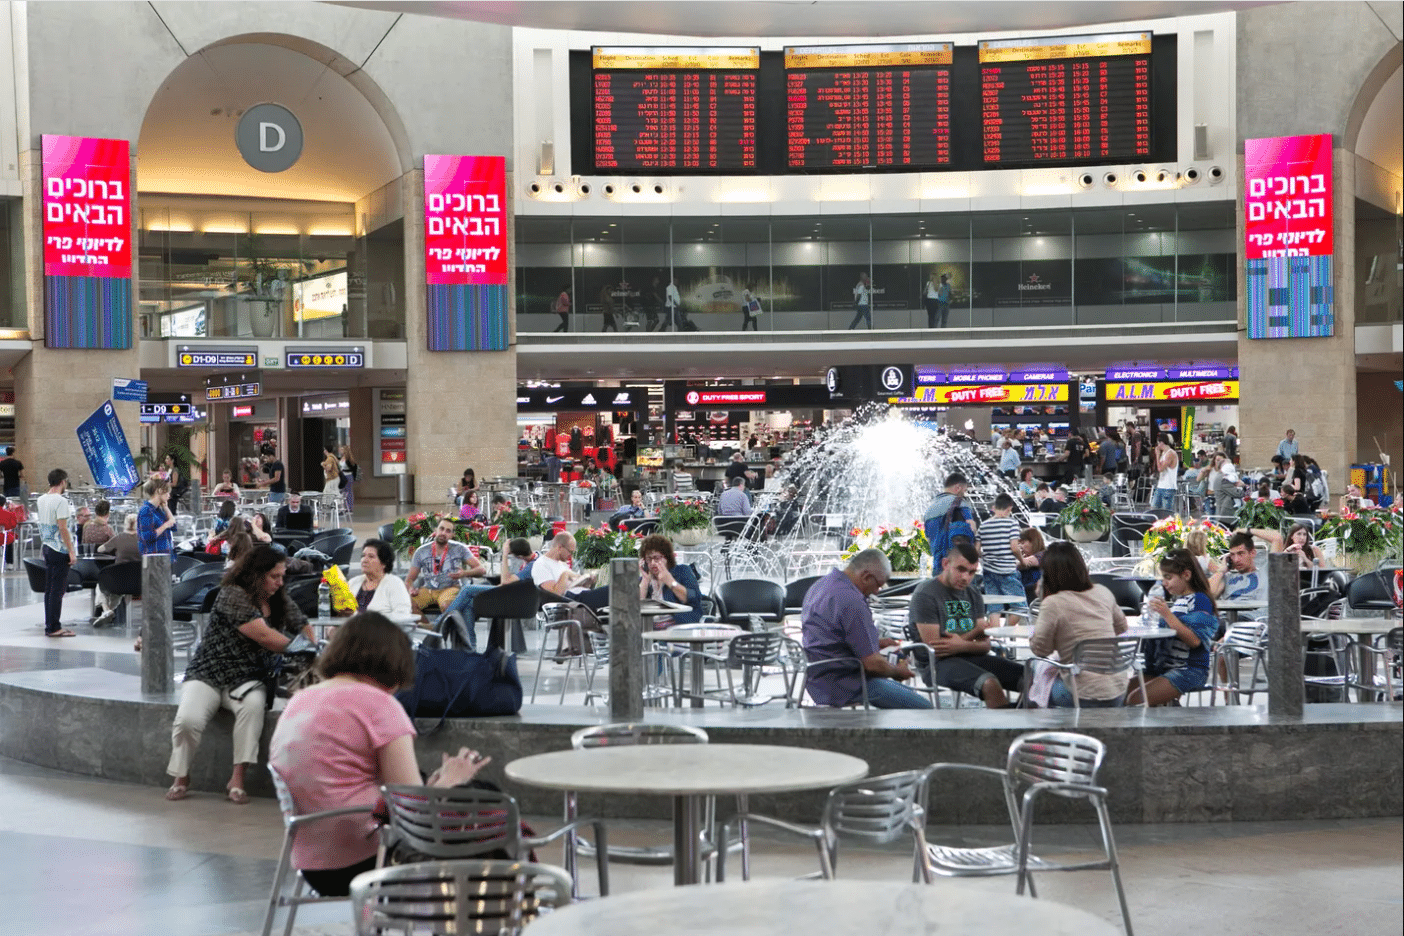 class action against Bank Hapoalim was approved regarding exchange commission in Ben Gurion Airport